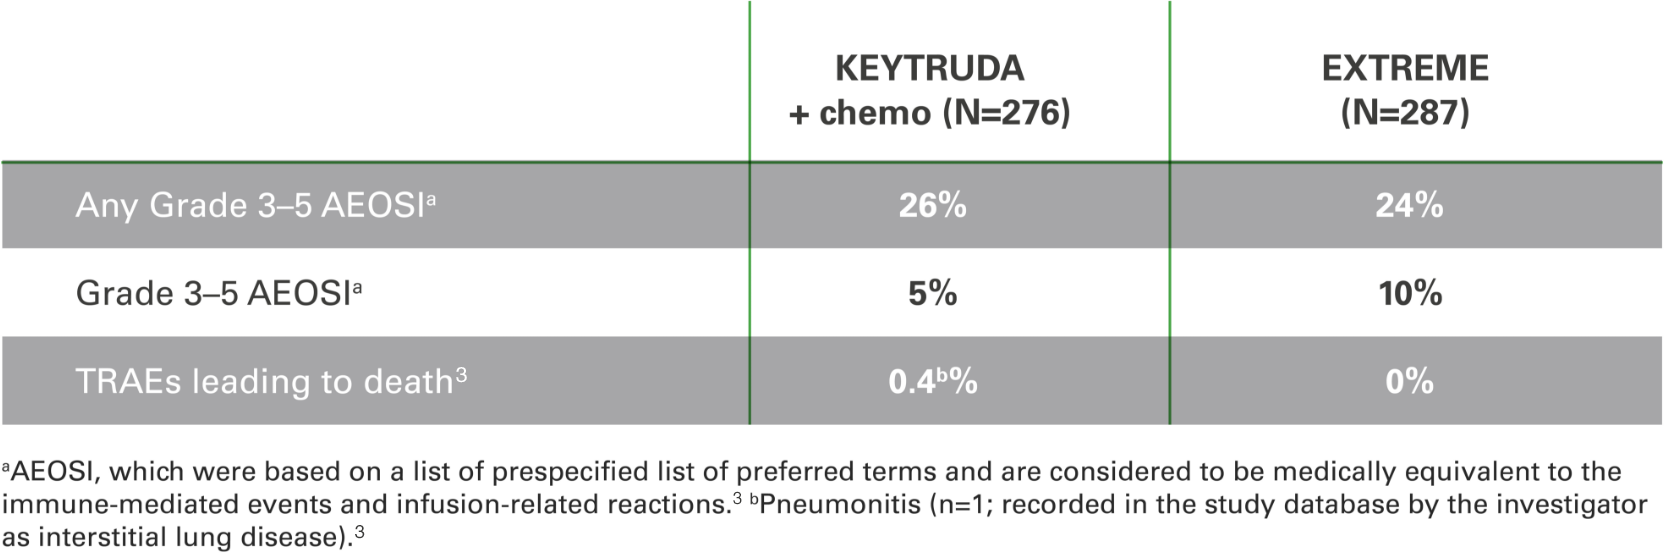 Table of adverse events of special interest for HNSCC patients in KEYNOTE 048 for KEYTRUDA (pembrolizumab) plus chemotherapy vs EXTREME